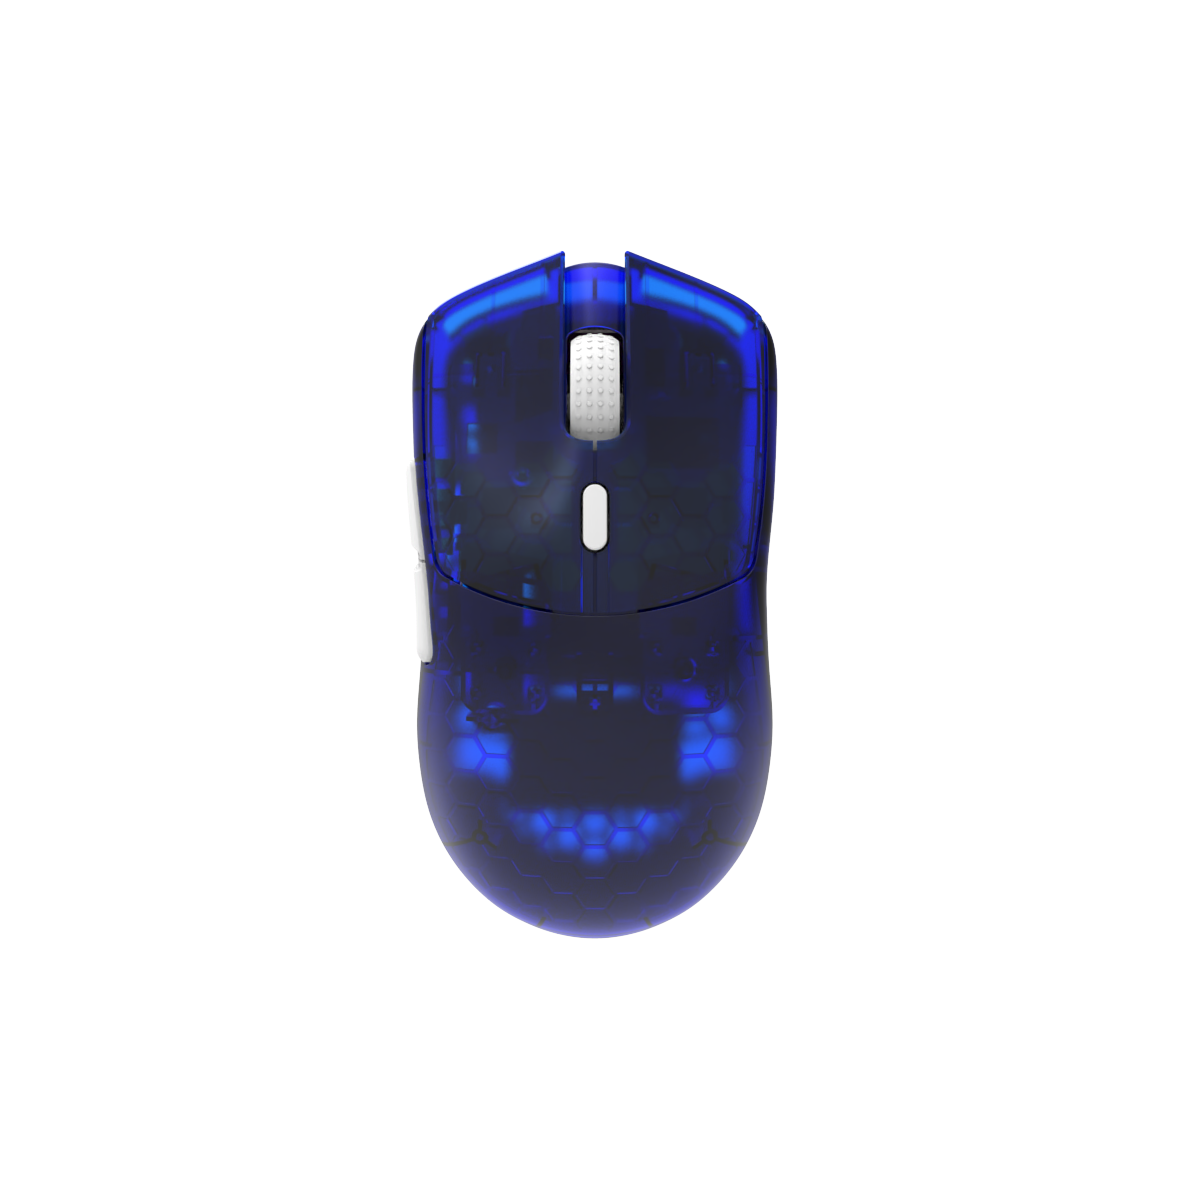 HTS Plus 8K Wireless Gaming Mouse,46g±1g，USB: Type C port